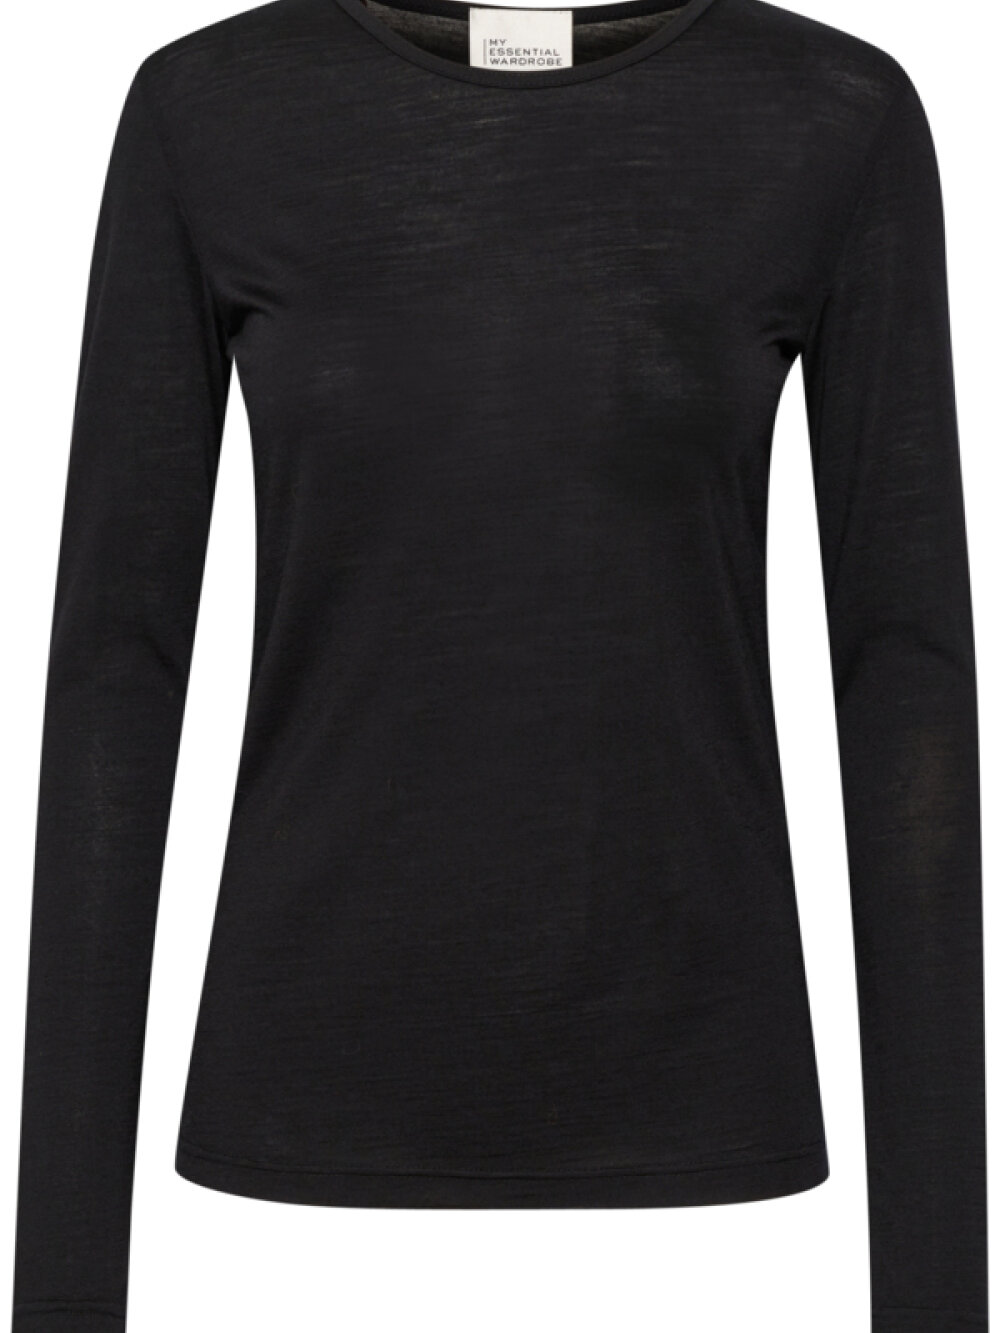 My Essential Wardrobe - 10 The Oneck Long Sleeve